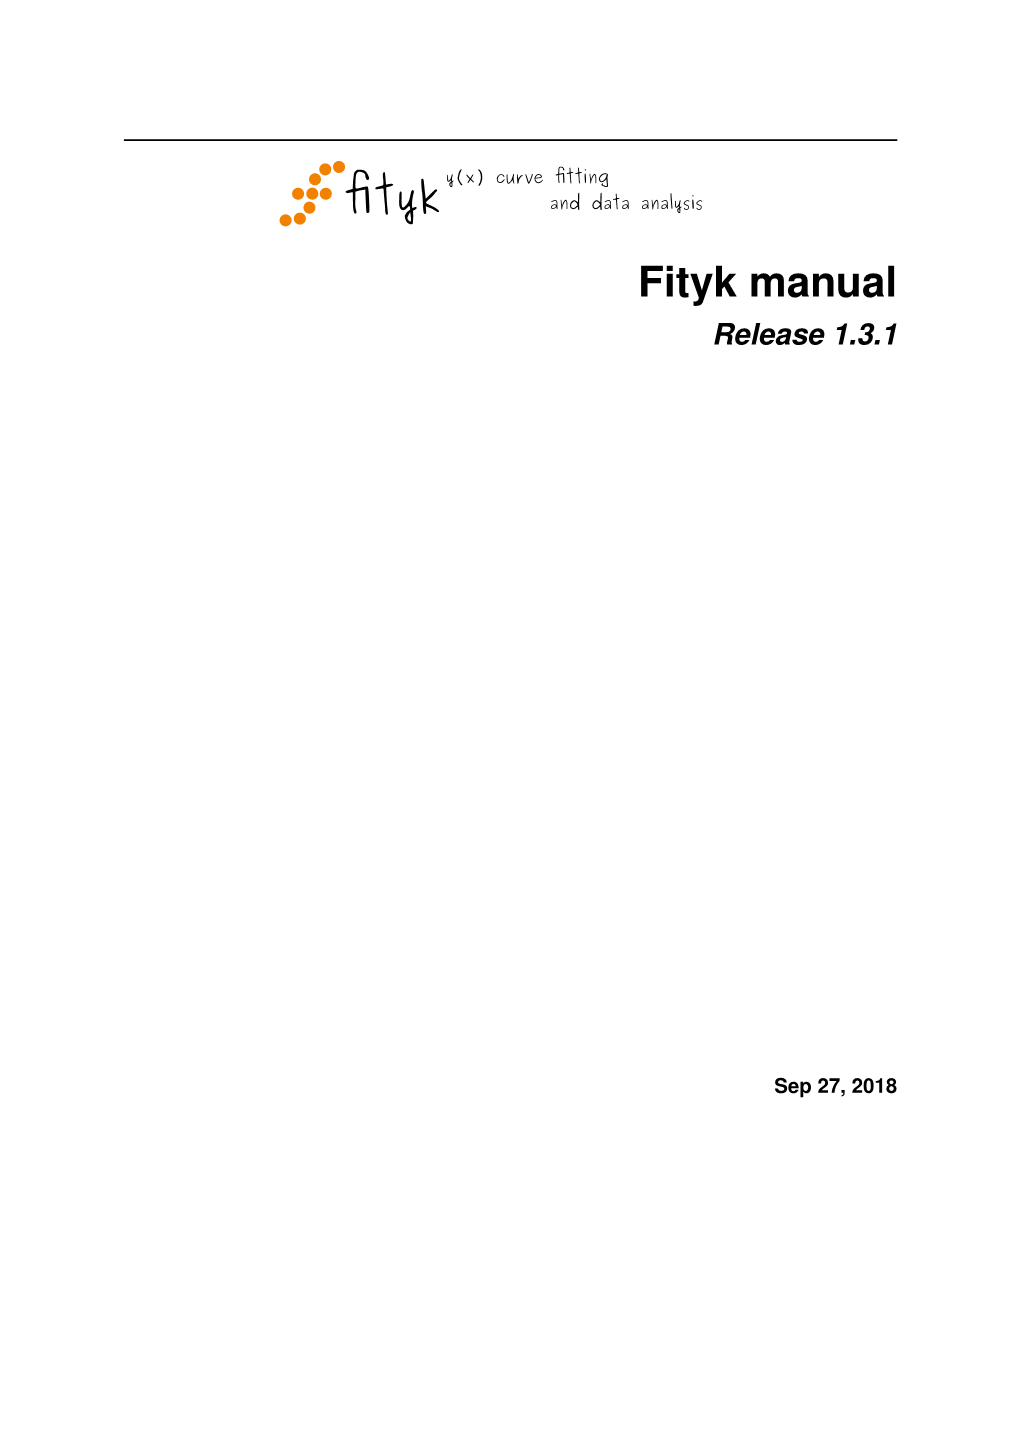 Fityk Manual Release 1.3.1